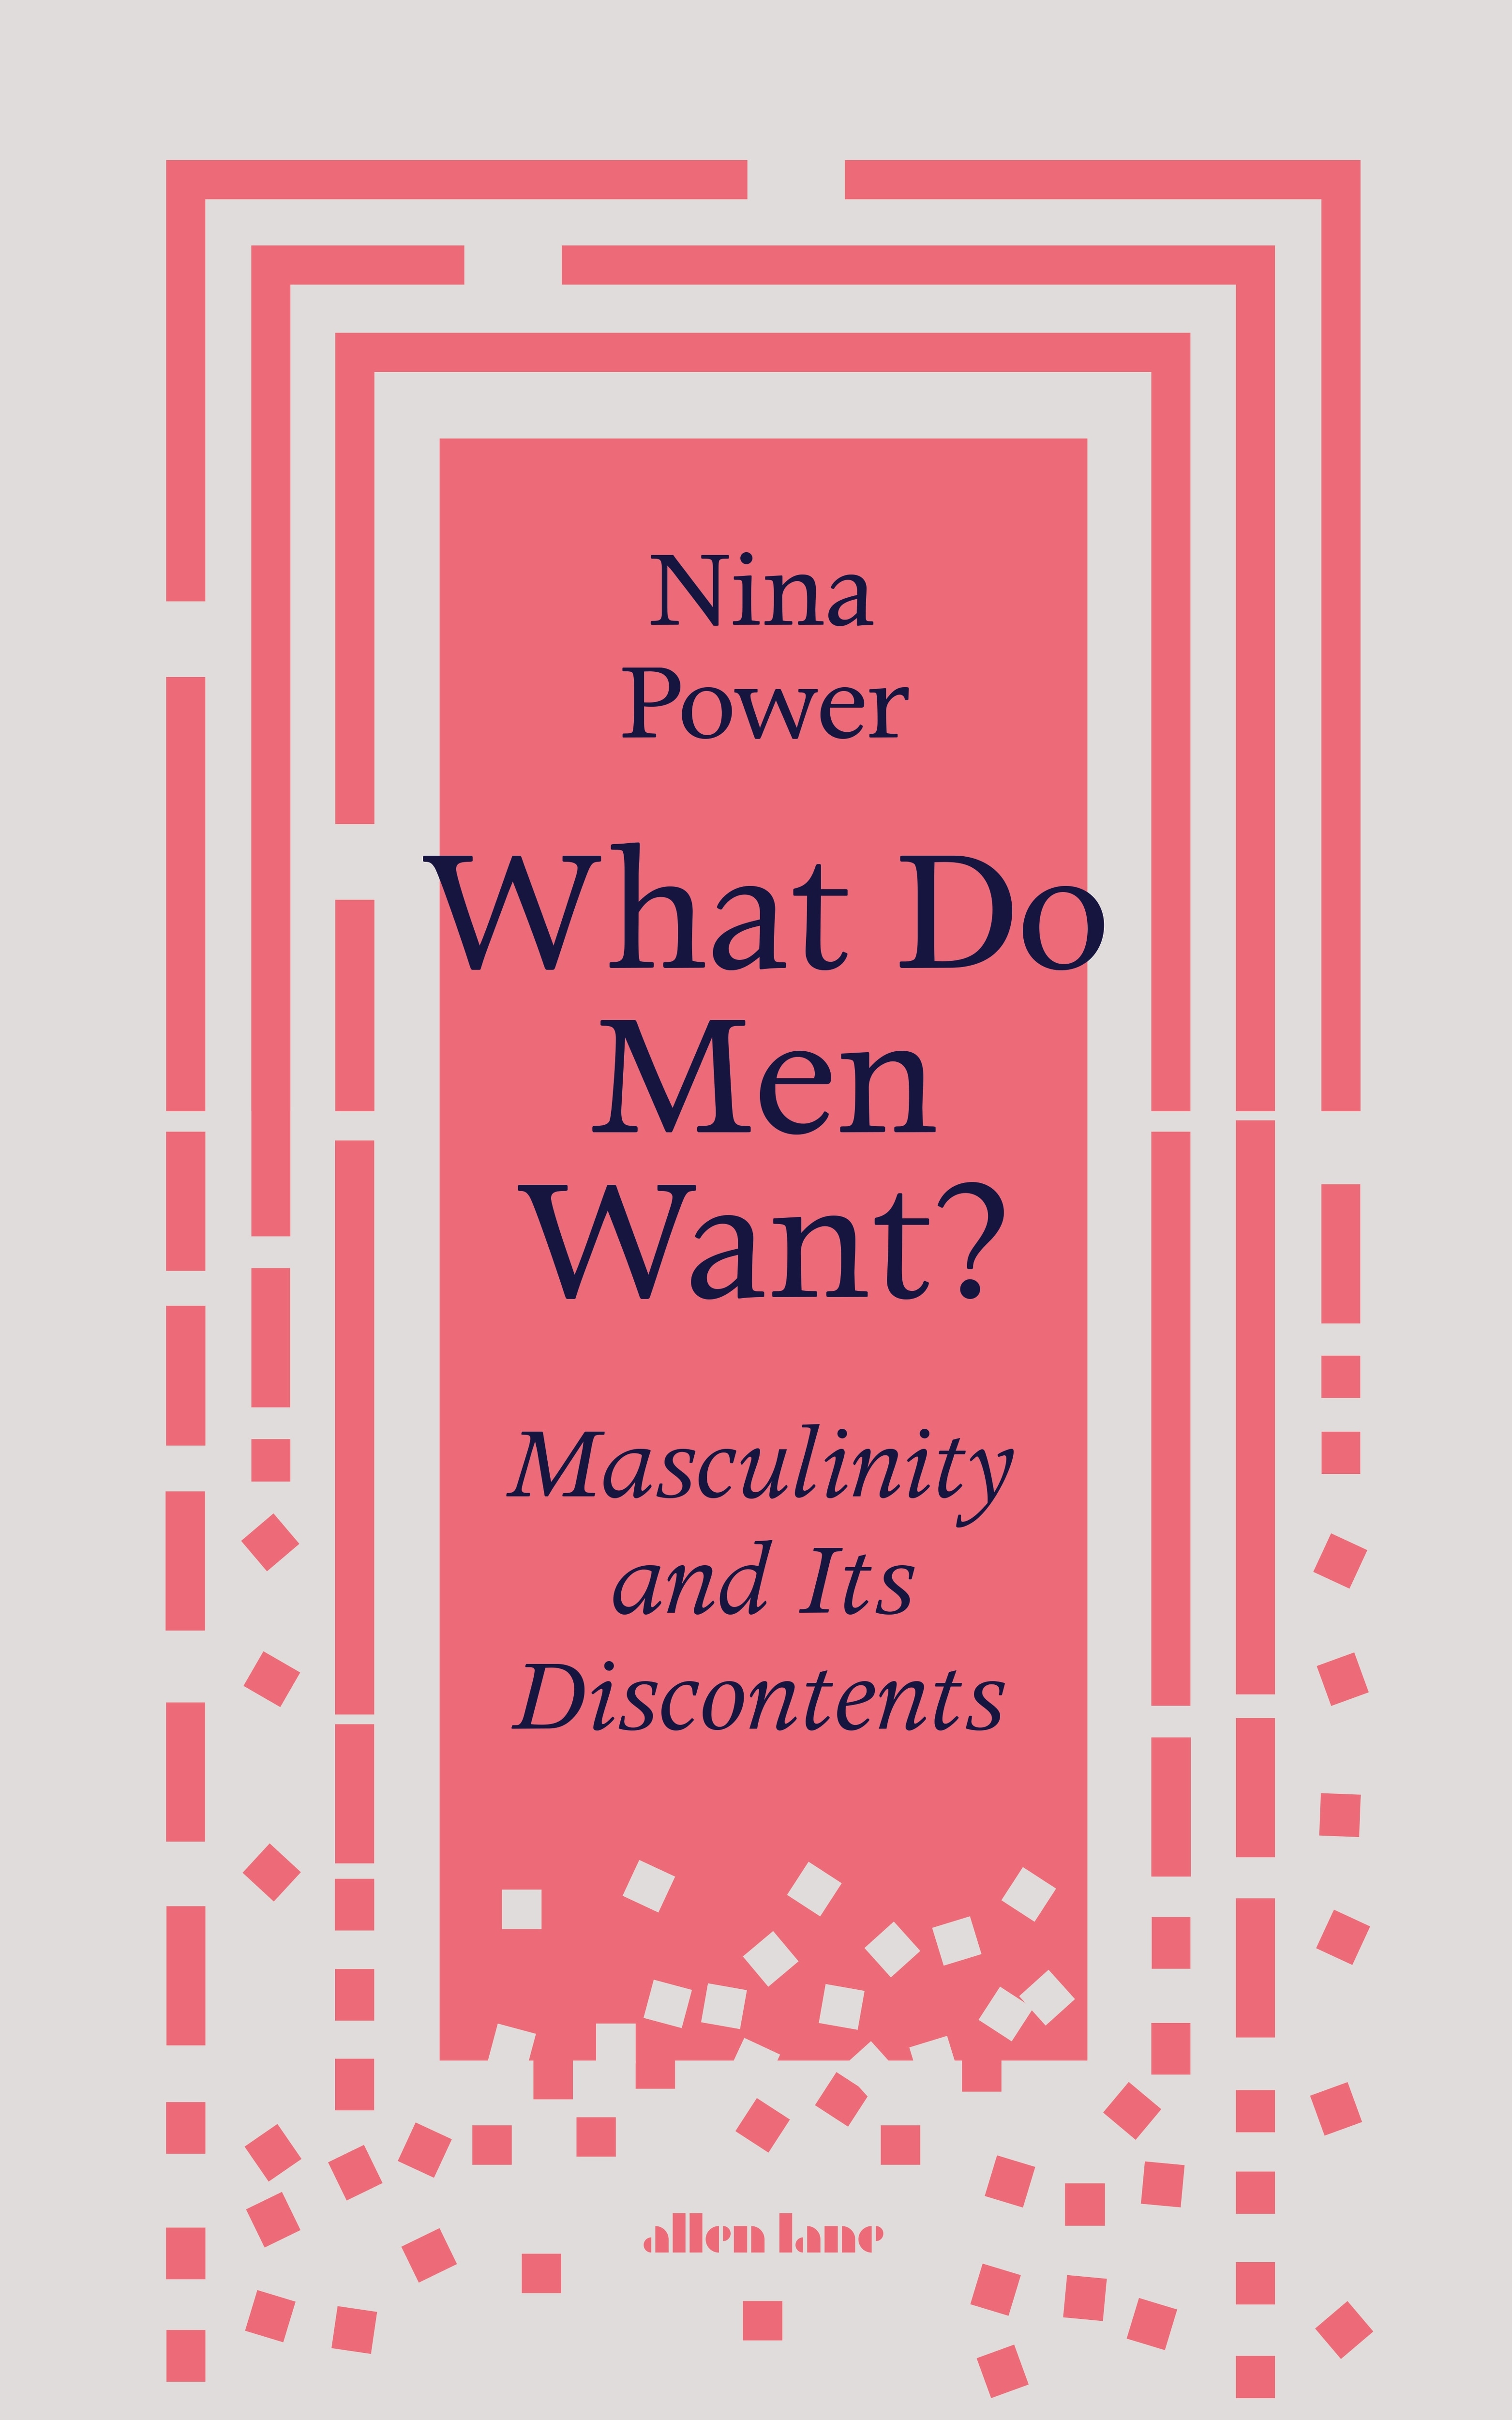 Book “What Do Men Want?” by Nina Power — February 3, 2022